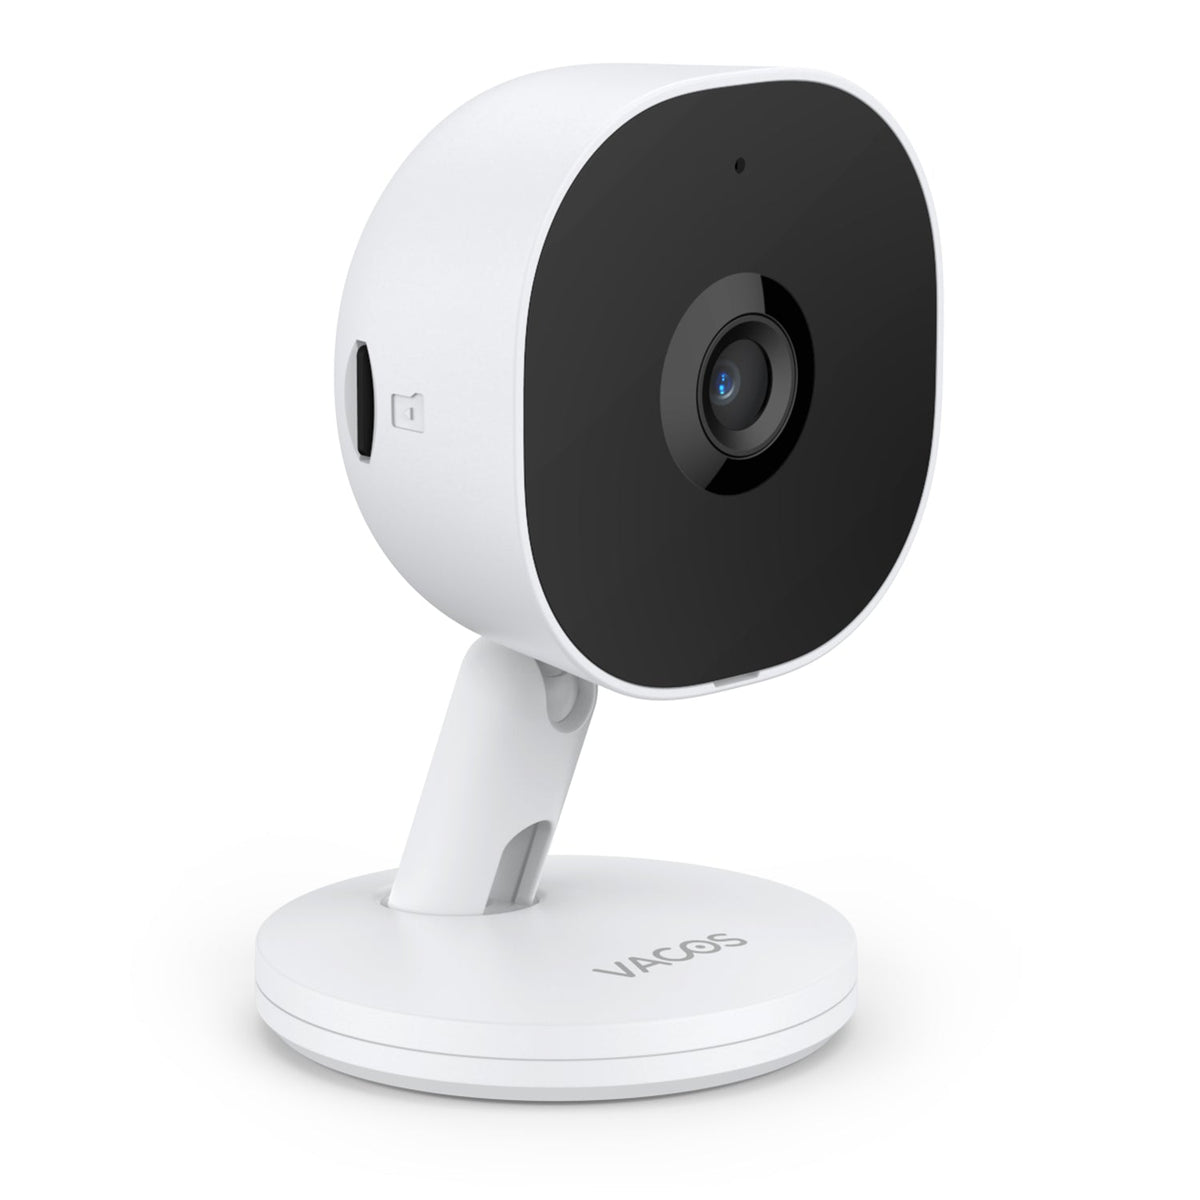 1080p WiFi Security IP camera, 2-Way Audio, Motion Detection, Works With Alexa & Google Assistant